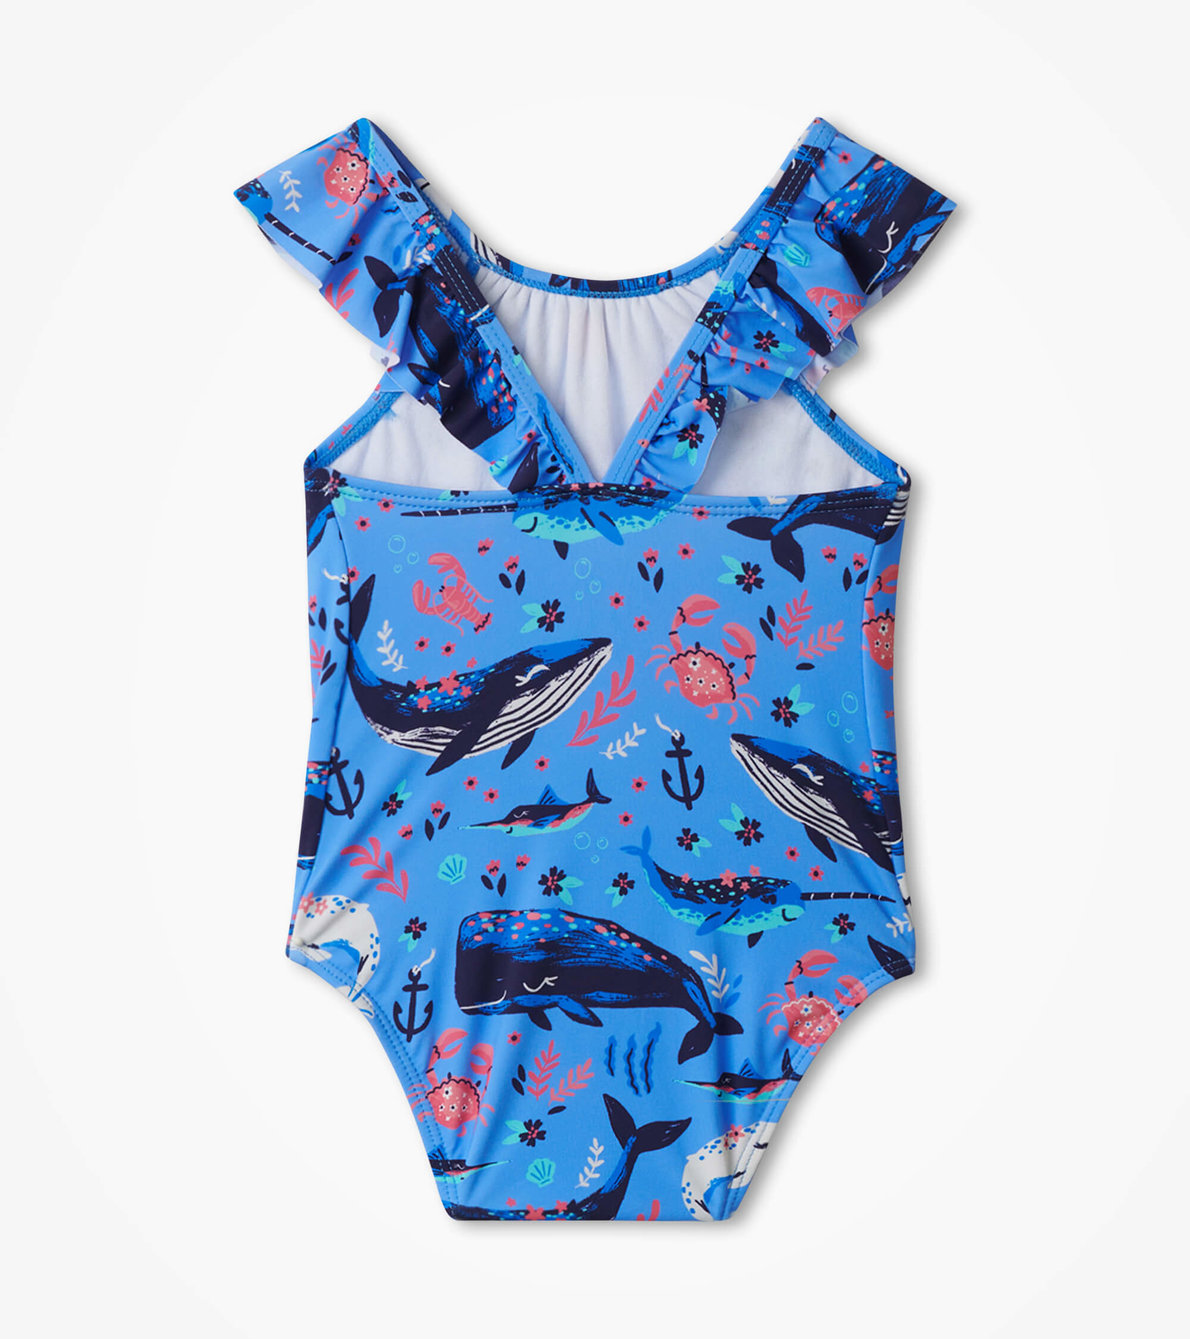 View larger image of Aquatic Friends Baby Ruffle Swimsuit